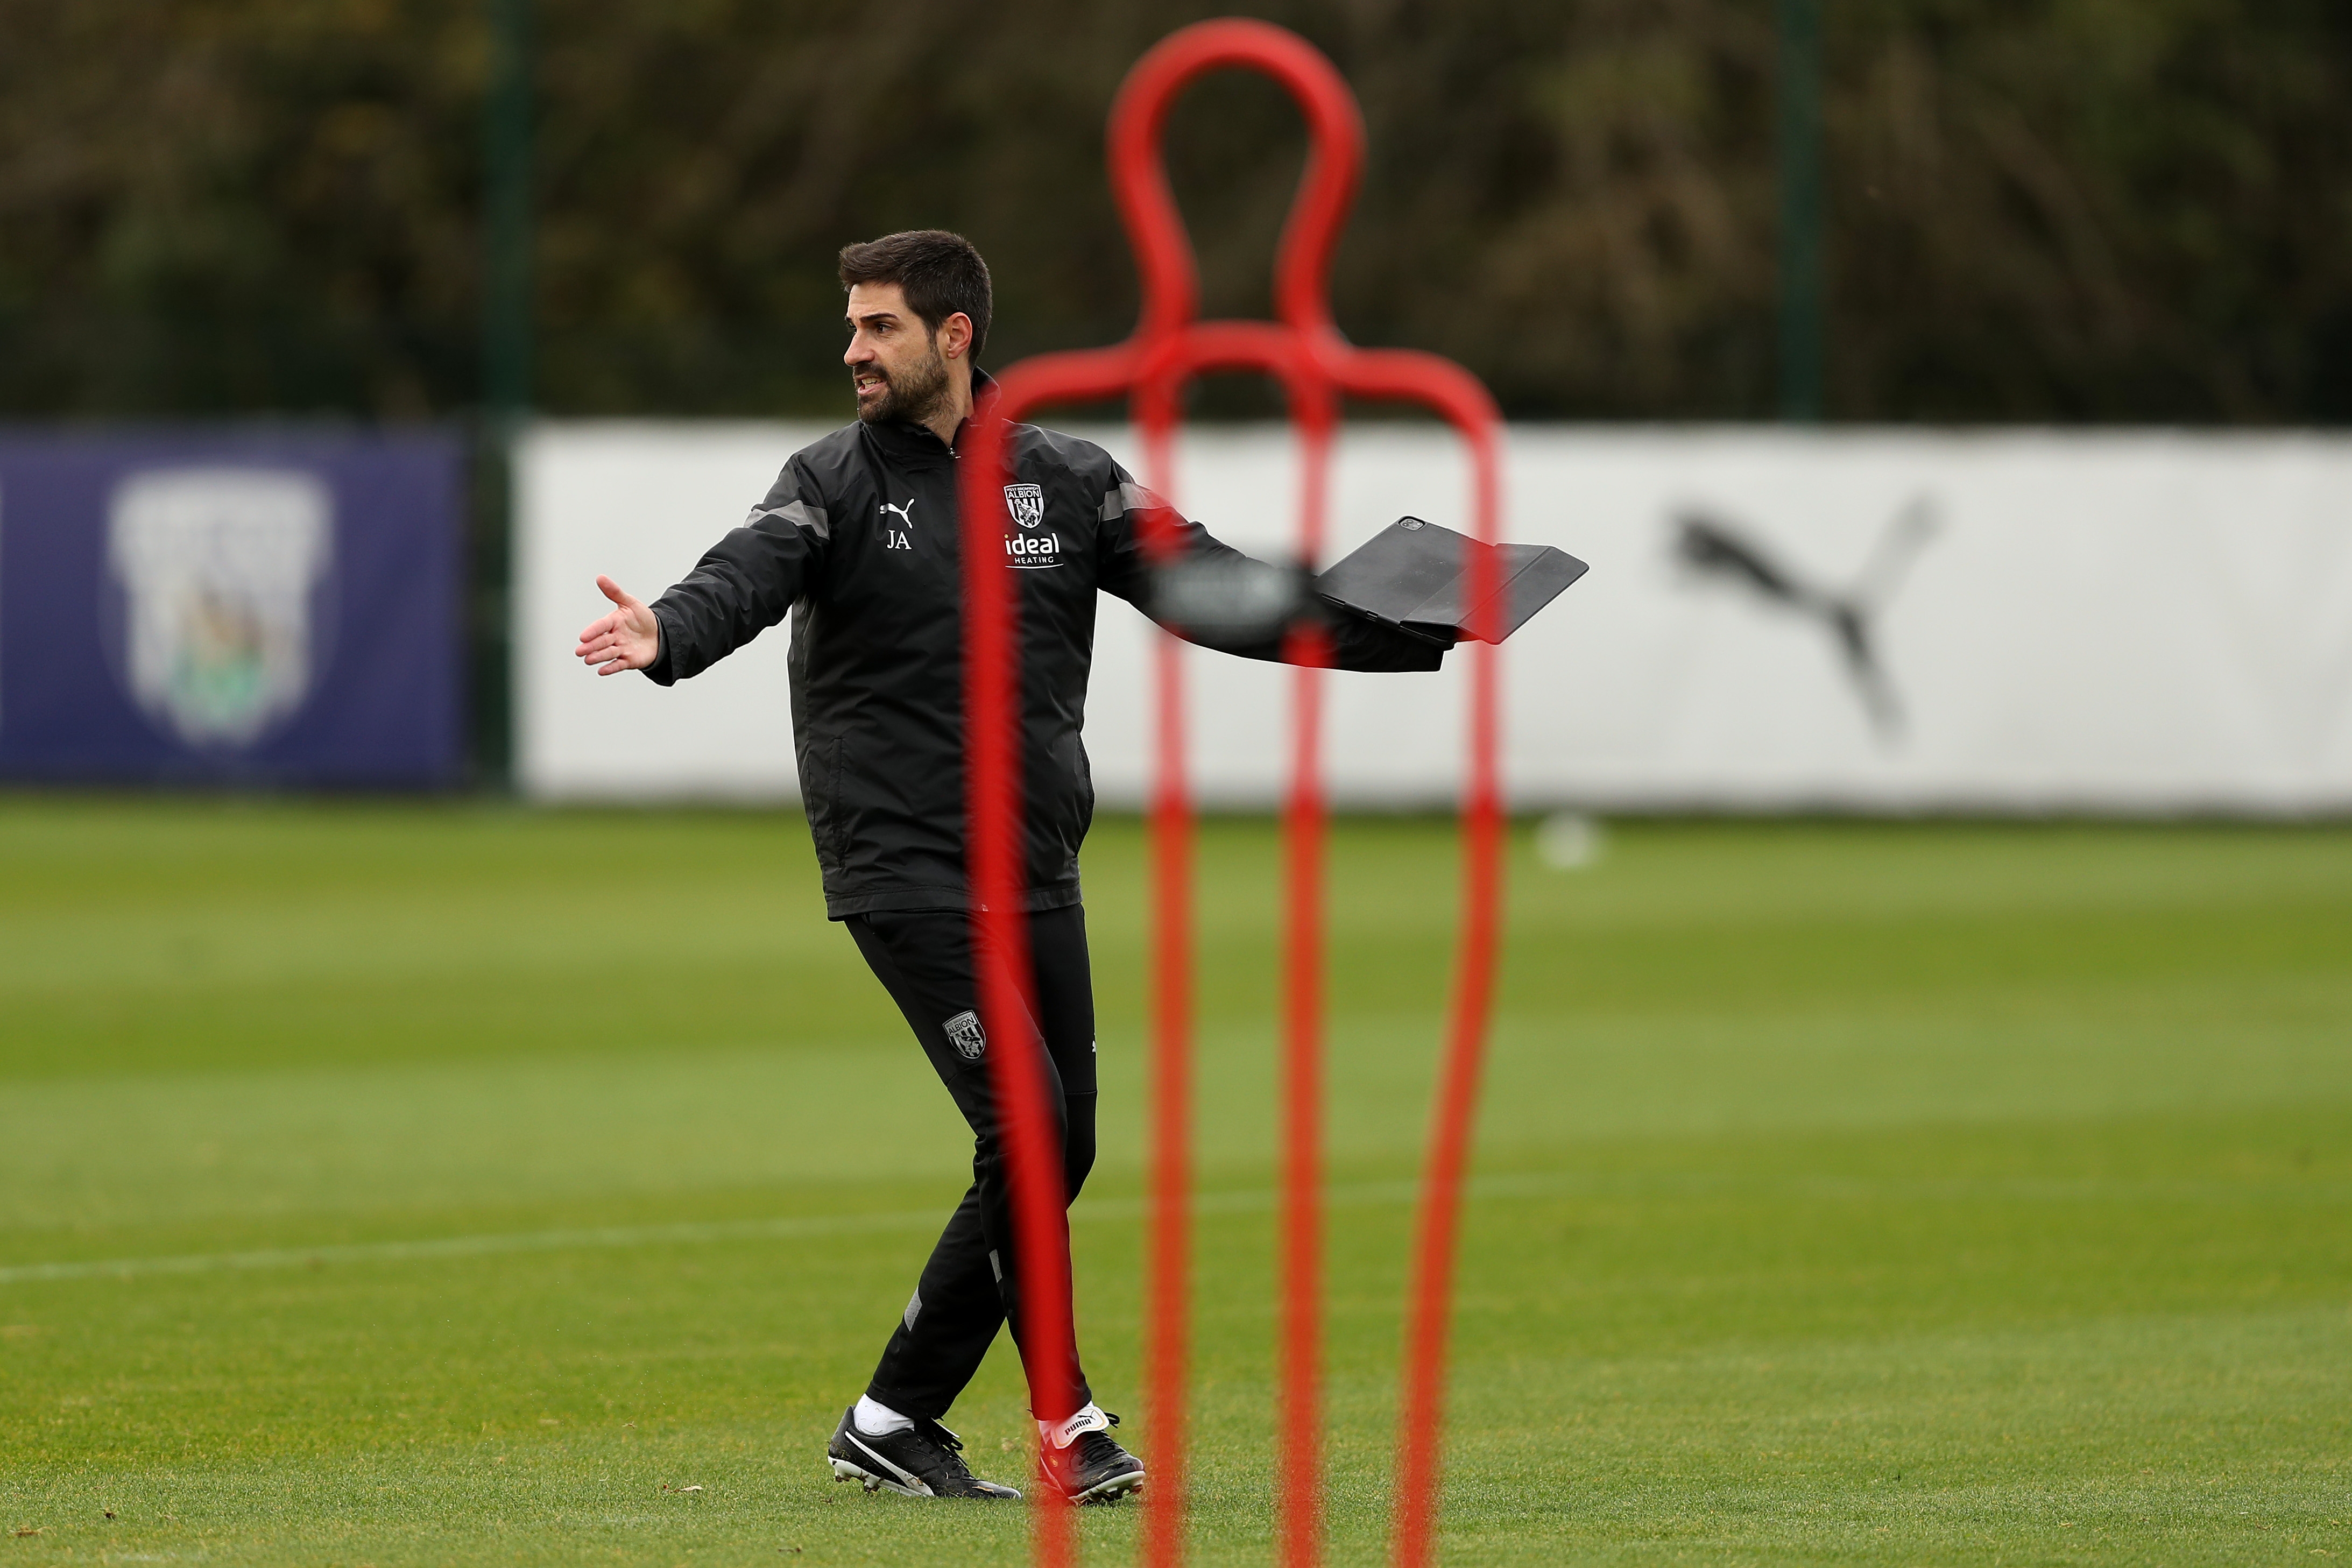 Jorge Alarcón during training ahead of the clash with Stoke City.